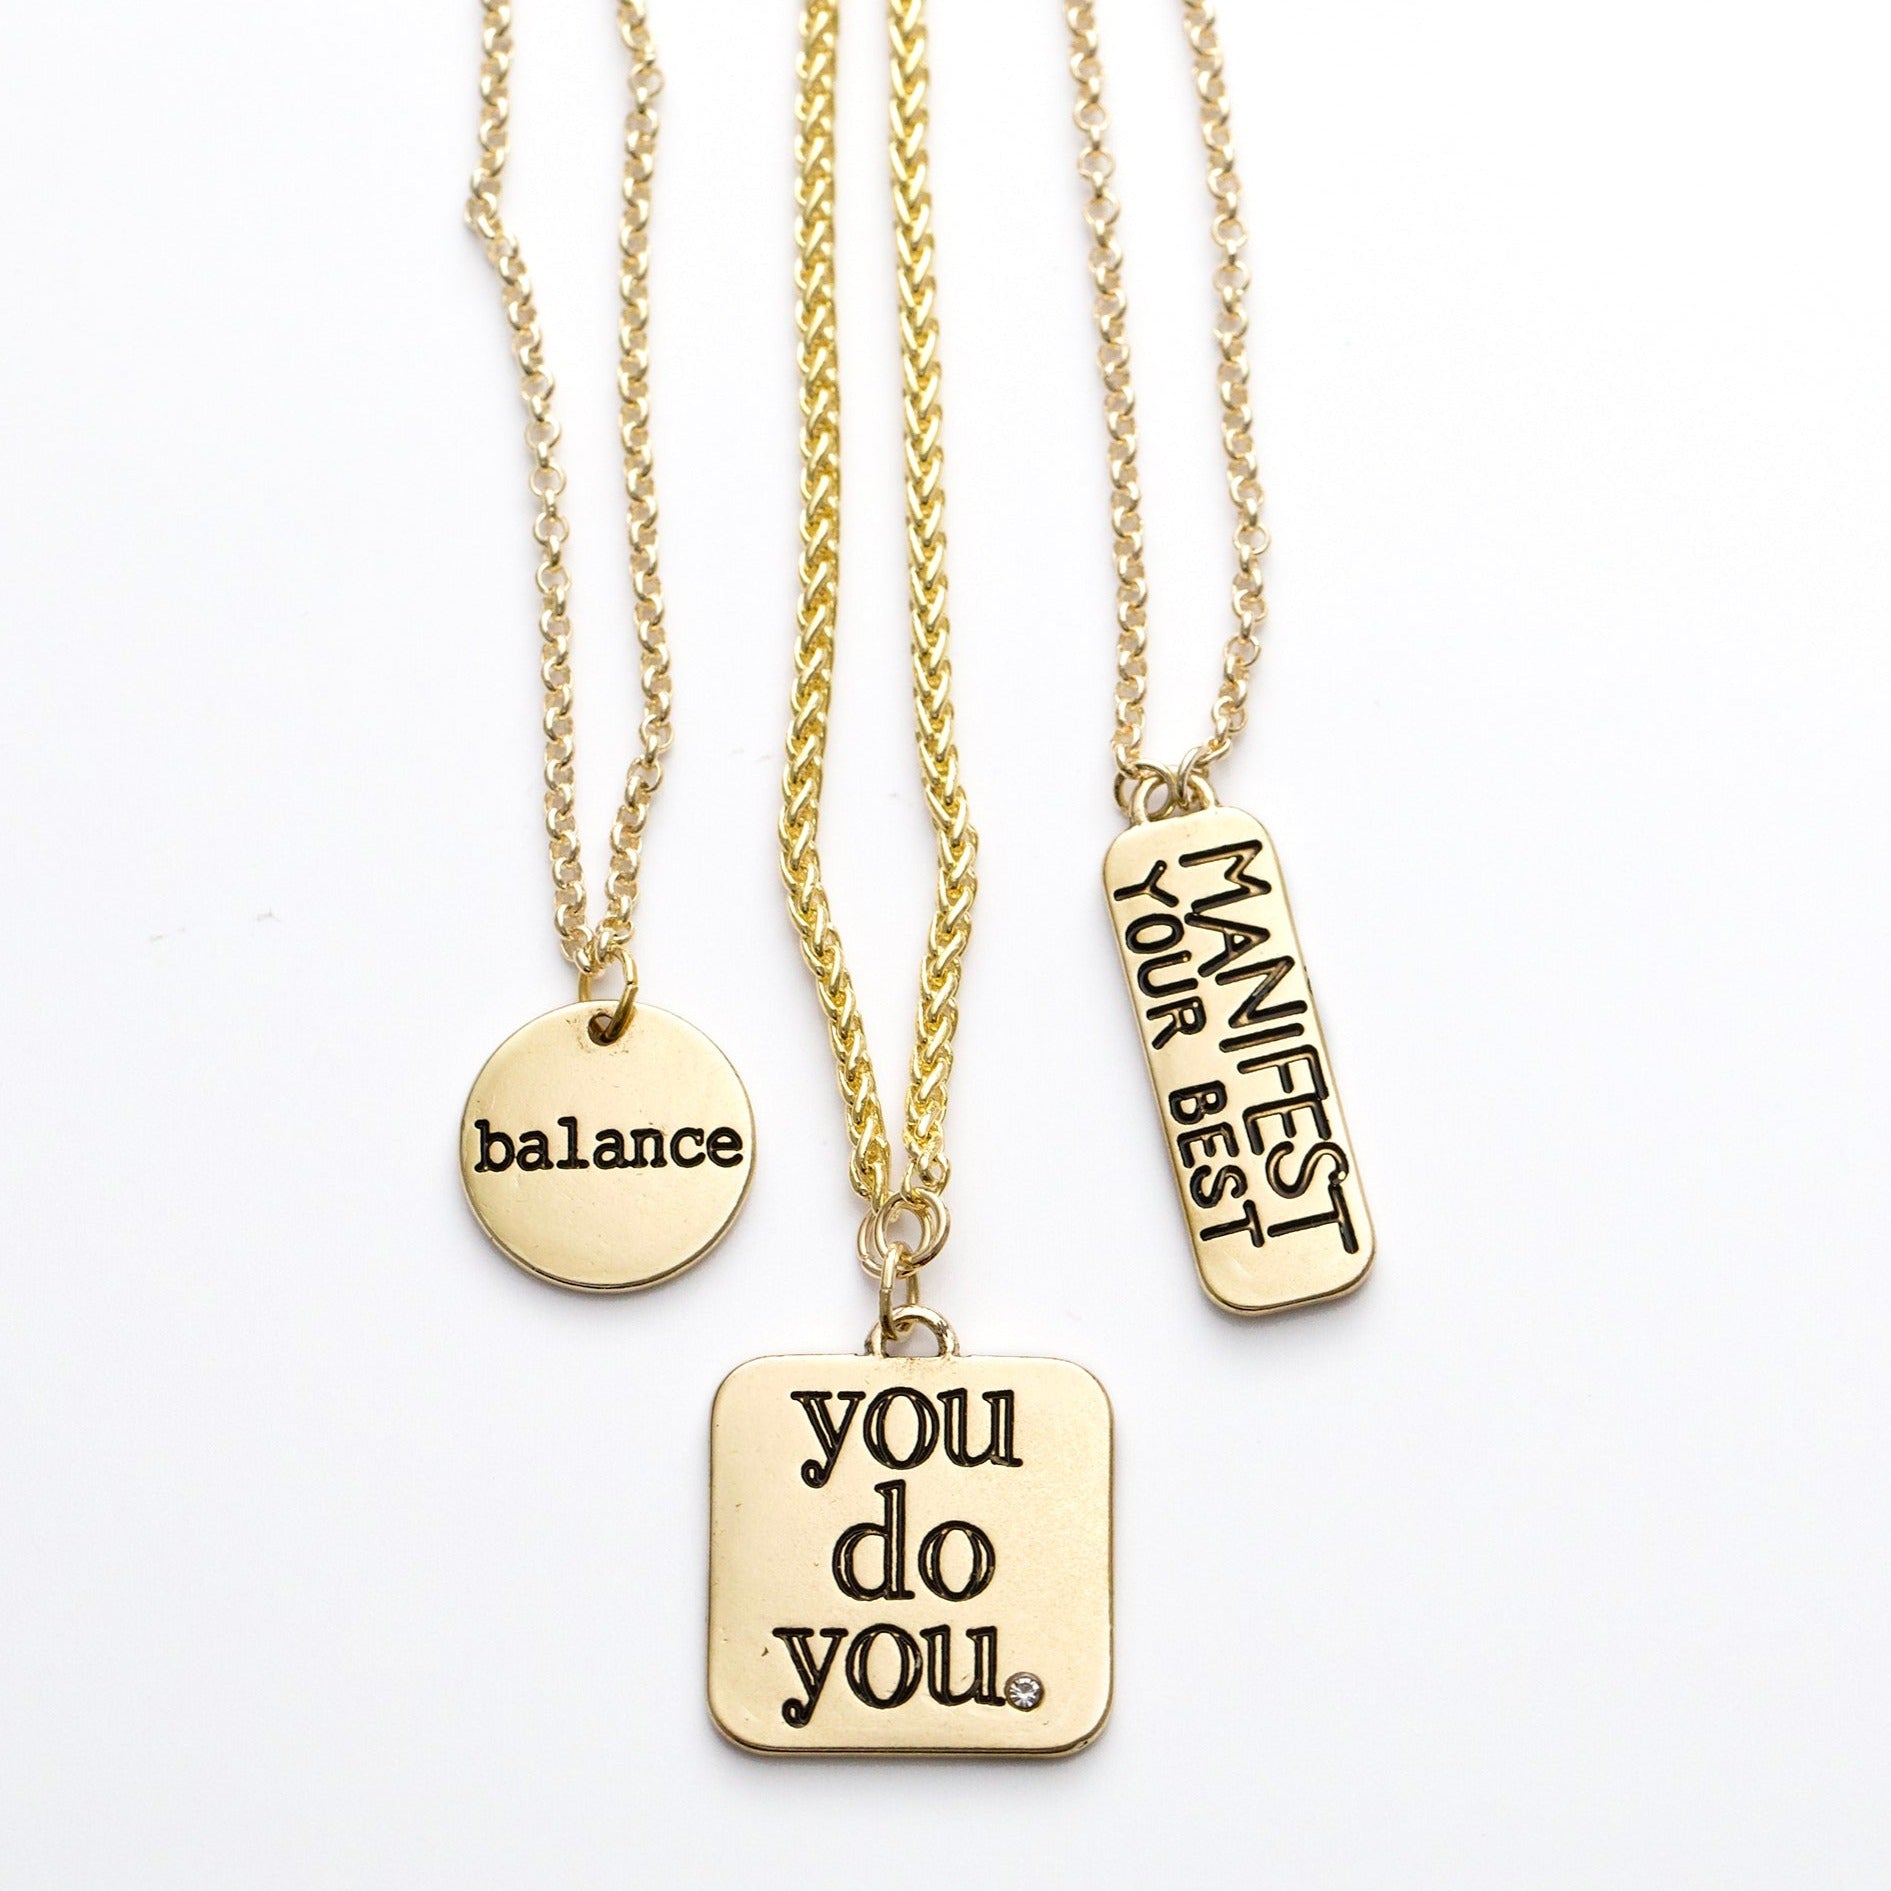 PowHERful 3 Piece Charm Set in Gold - "Manifest Your Best" "You Do You" "Balance" - GB Exclusive - Goody Beads